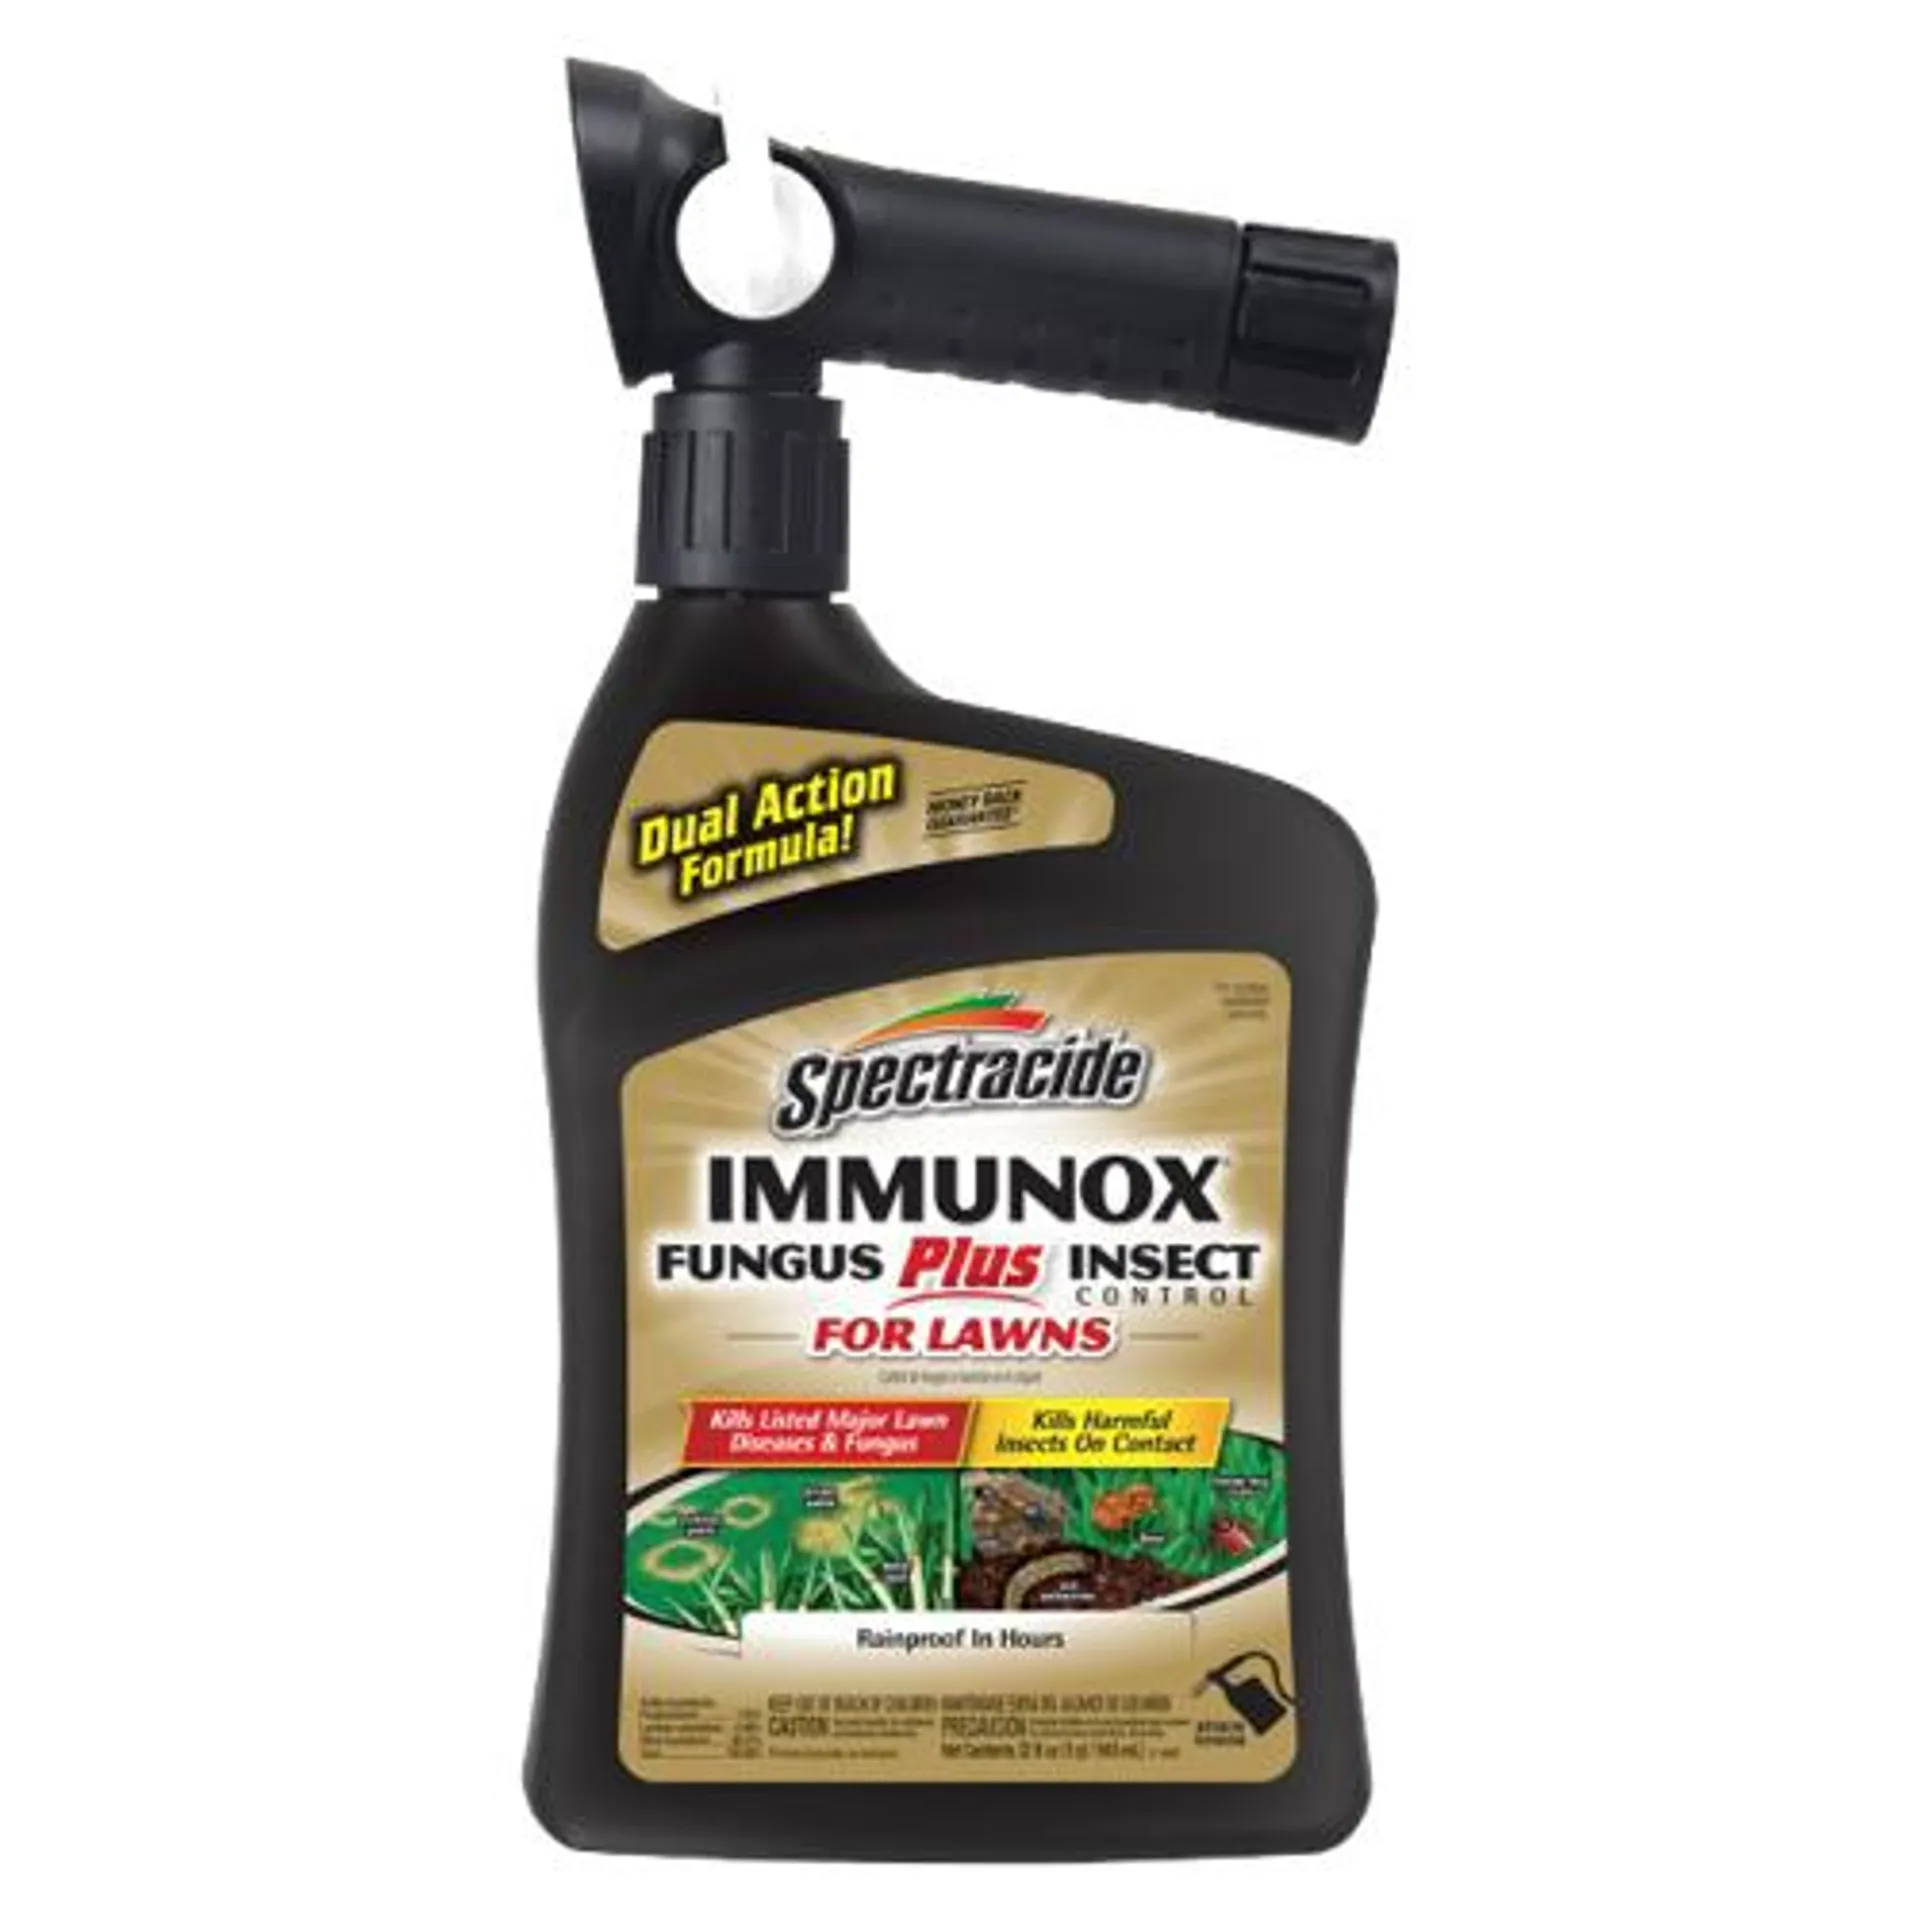 Spectracide Immunox Fungus Plus Insect Control For Lawns (Ready-to-Use)- 32oz